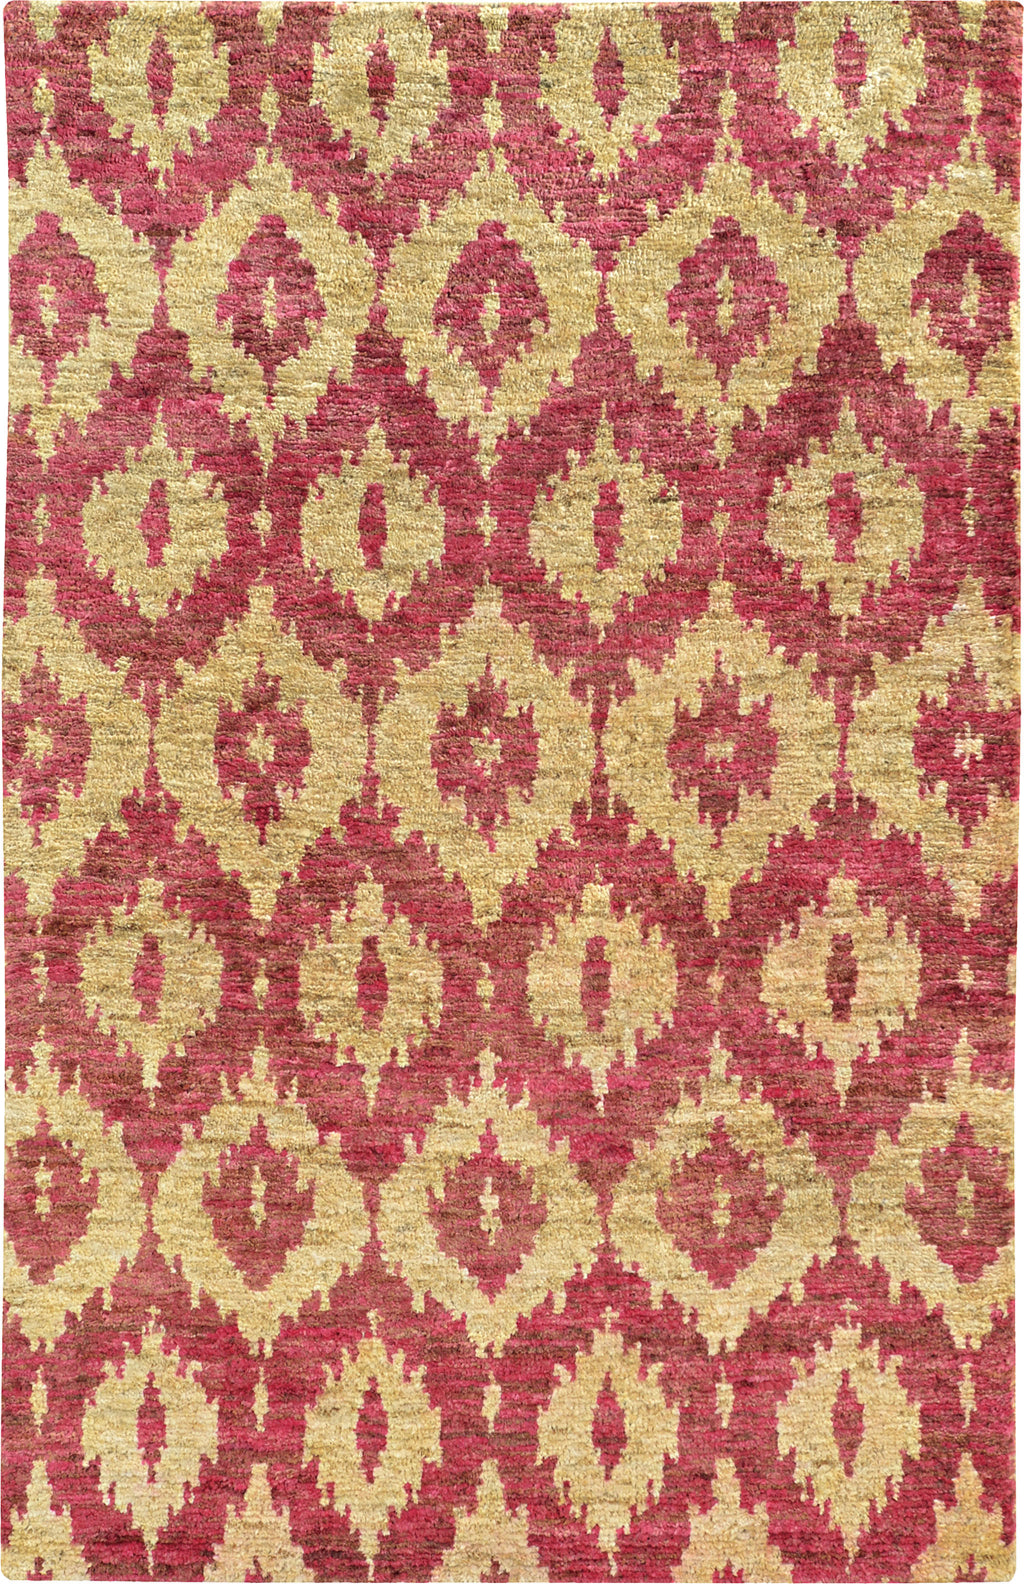 Tommy Bahama Ansley 50901 Beige/ Pink Area Rug Main Image Feature